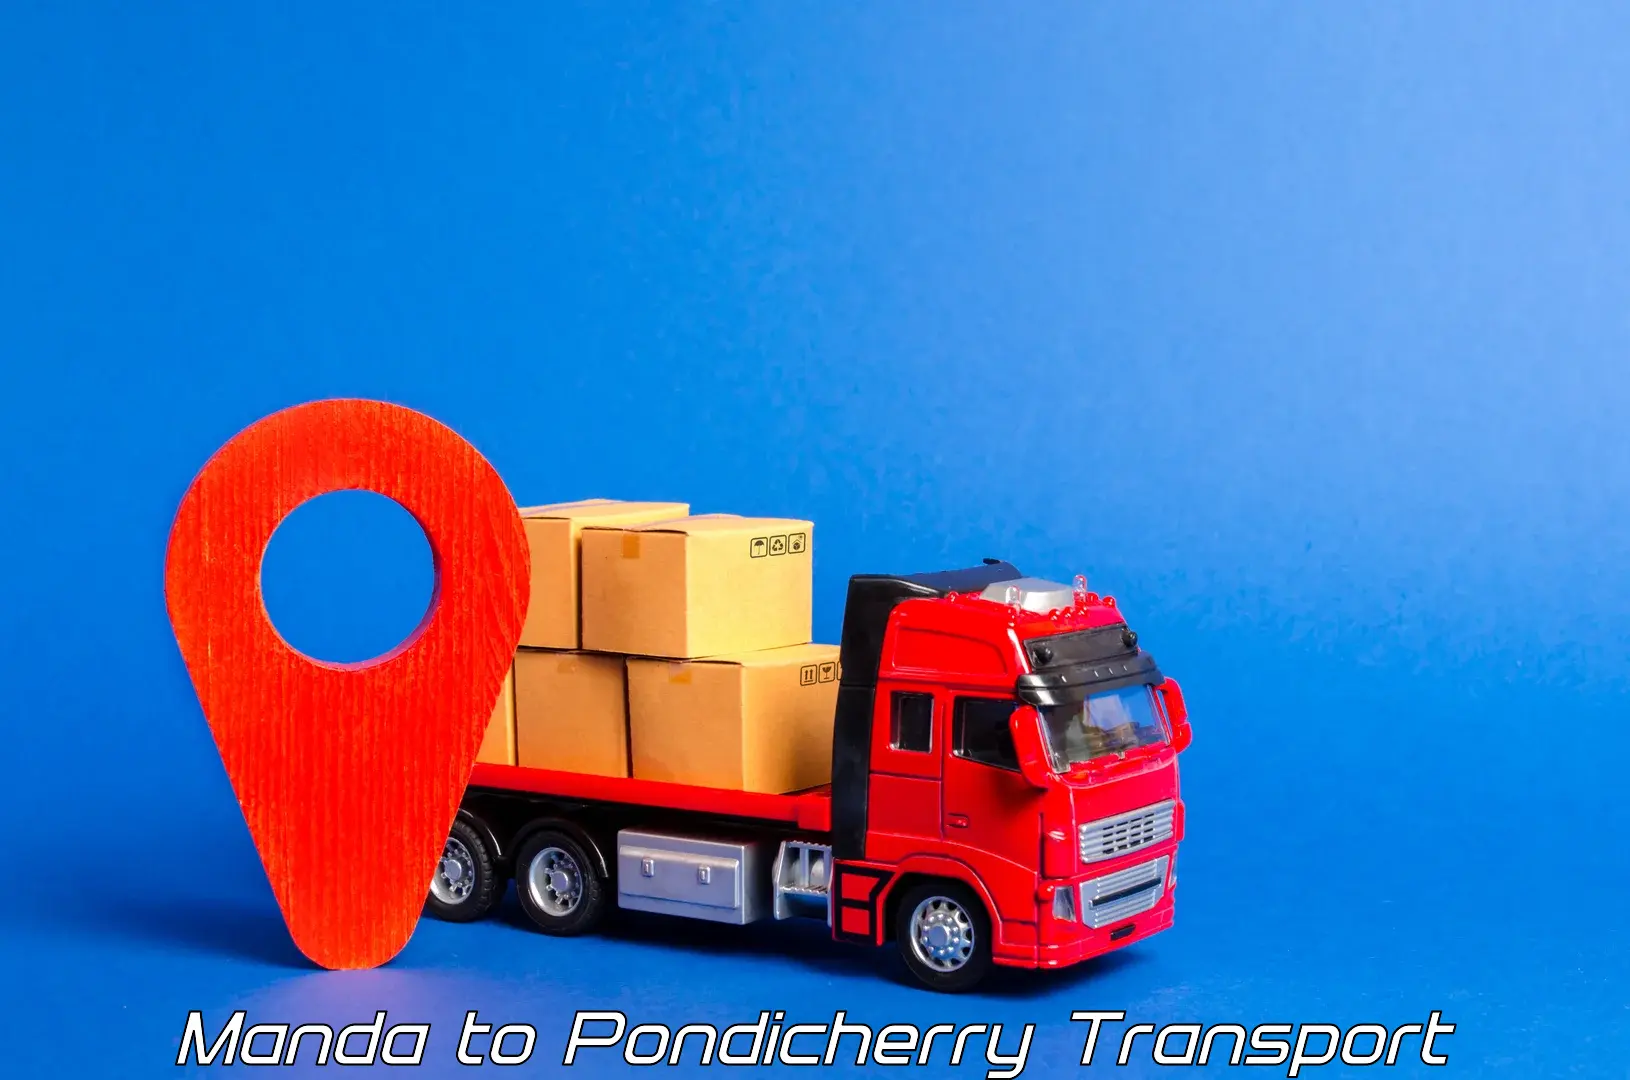 Daily parcel service transport in Manda to Pondicherry